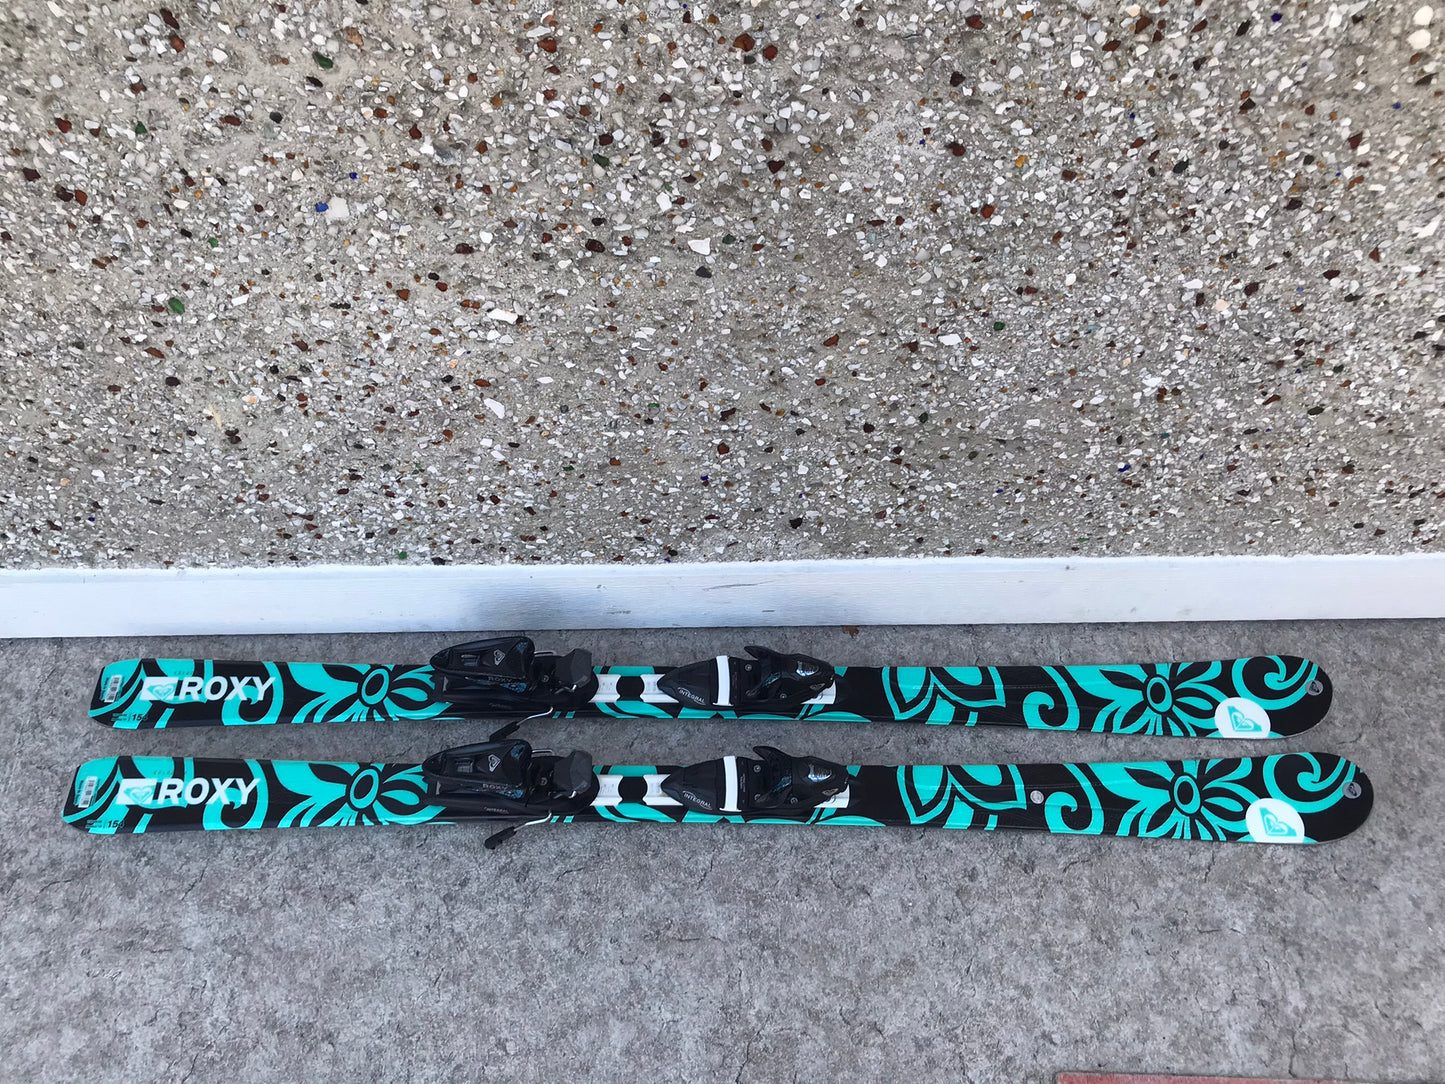 Ski 154 Roxy Teal Black  Parabolic with Bindings Excellent